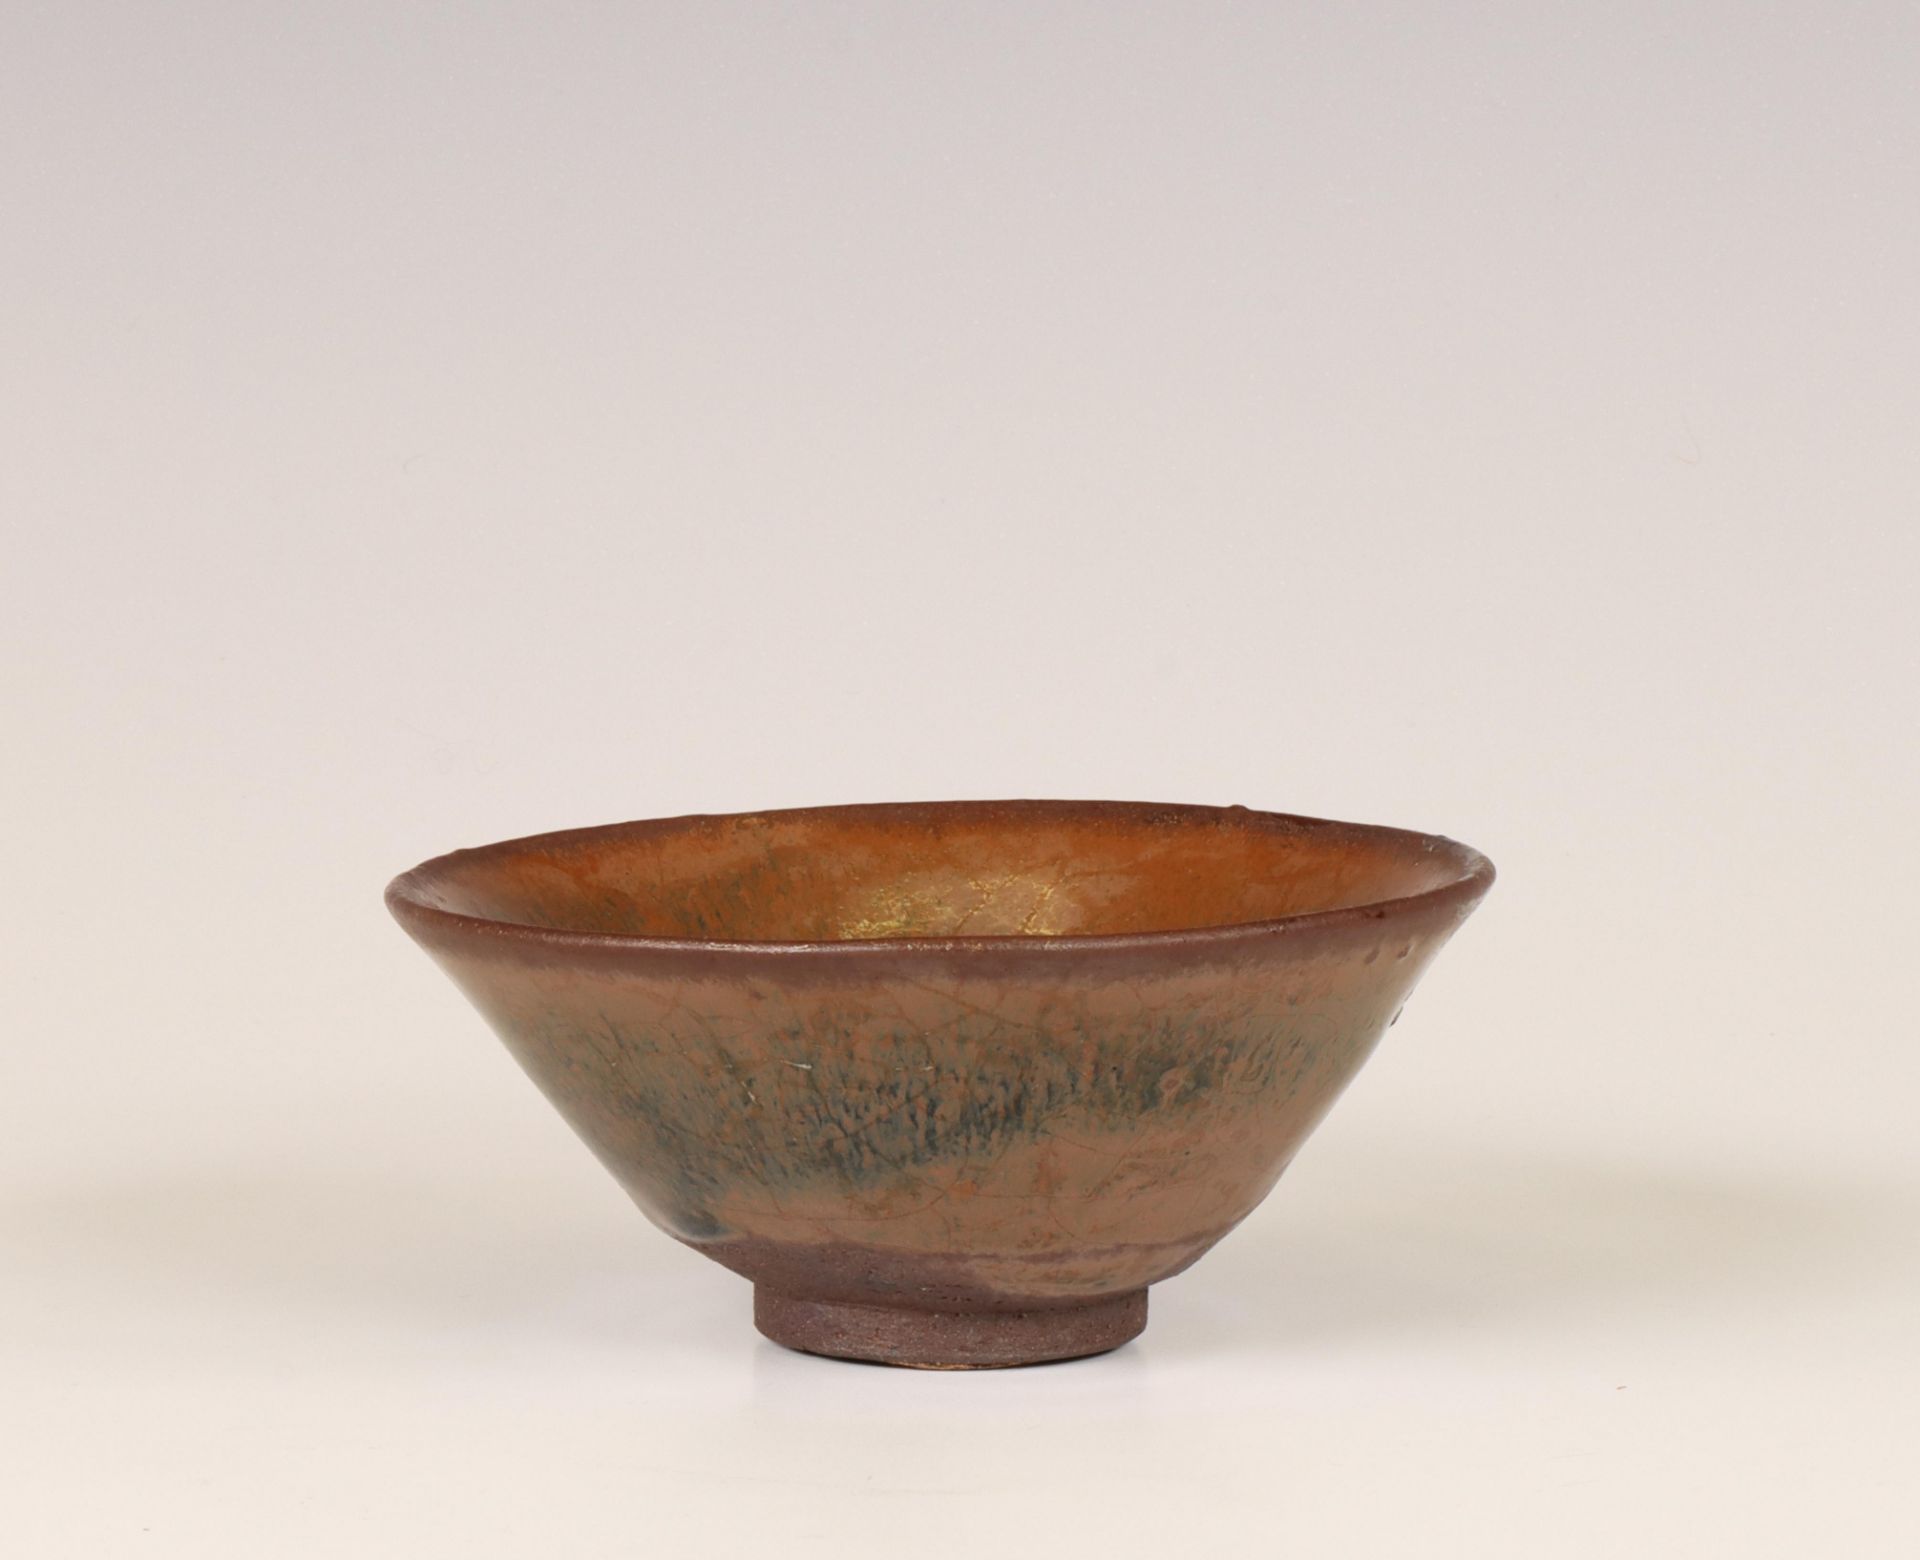 China, a 'hare's fur' tea bowl, probably Southern Song dynasty (1127-1279),